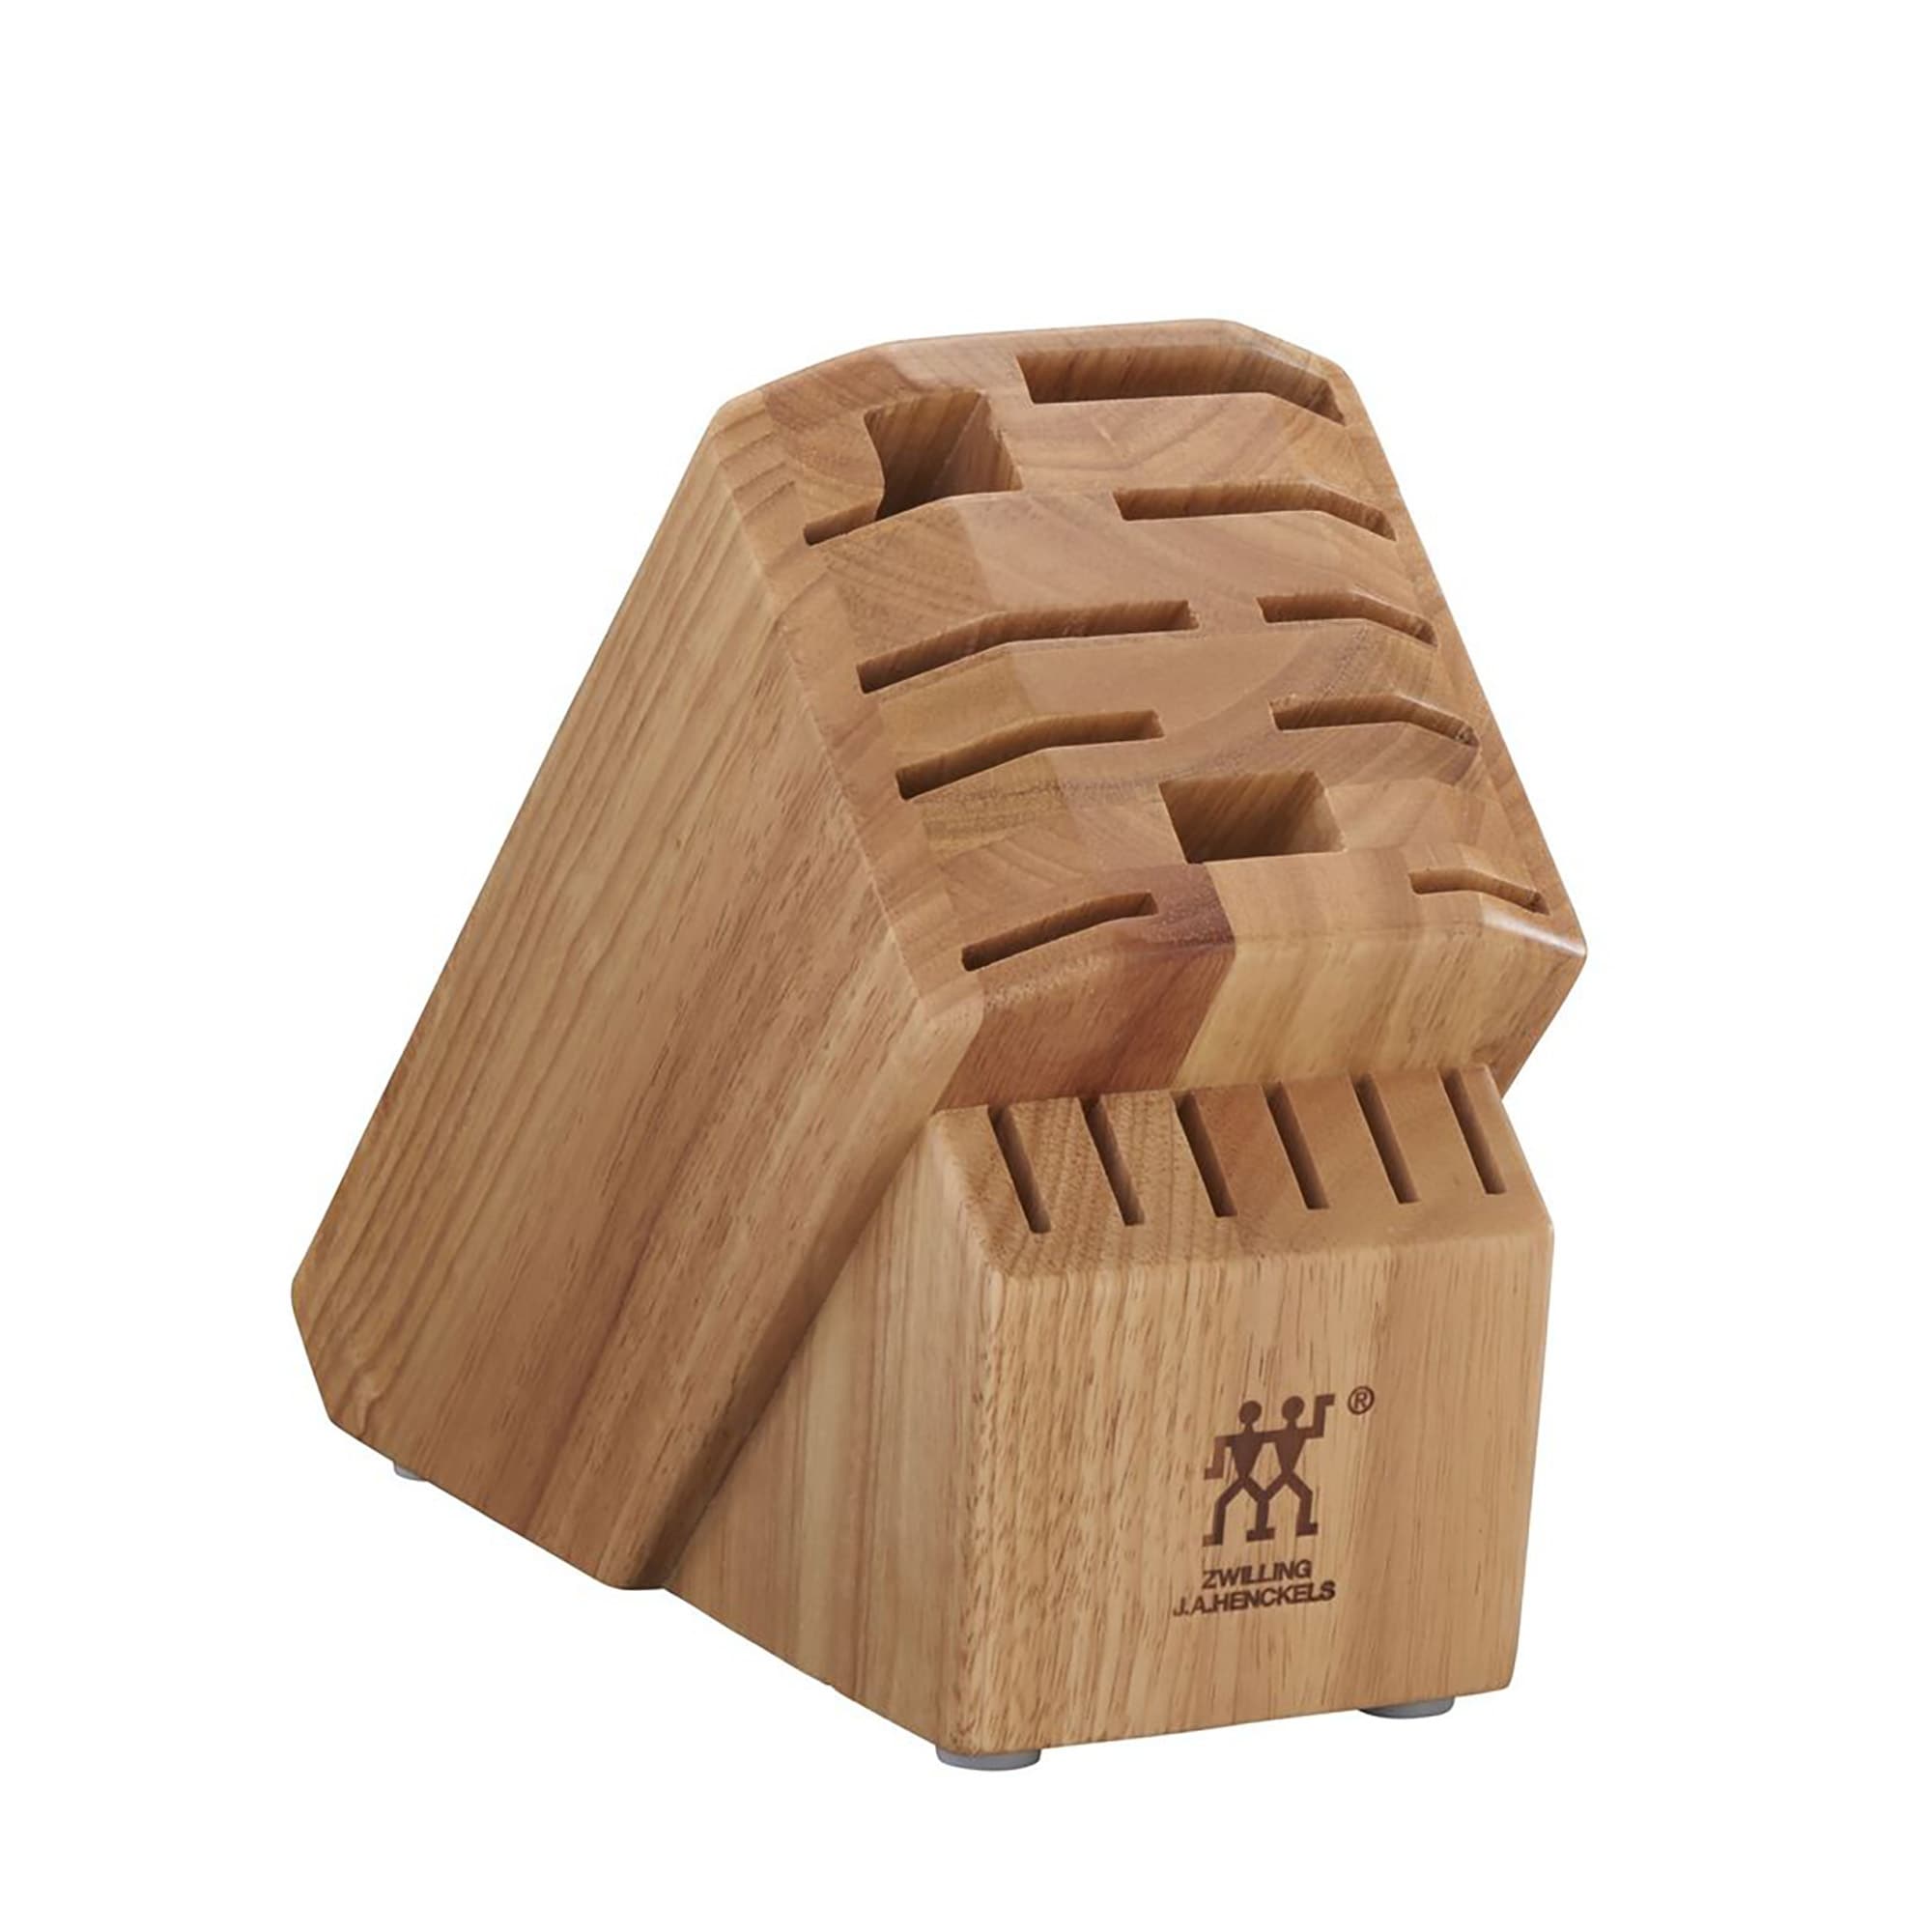 https://ak1.ostkcdn.com/images/products/is/images/direct/c5aa0ba695e26f15aa62a3e7cd5d90567ee082dc/ZWILLING-Pro-16-slot-Knife-Block---Rubberwood-Natural.jpg